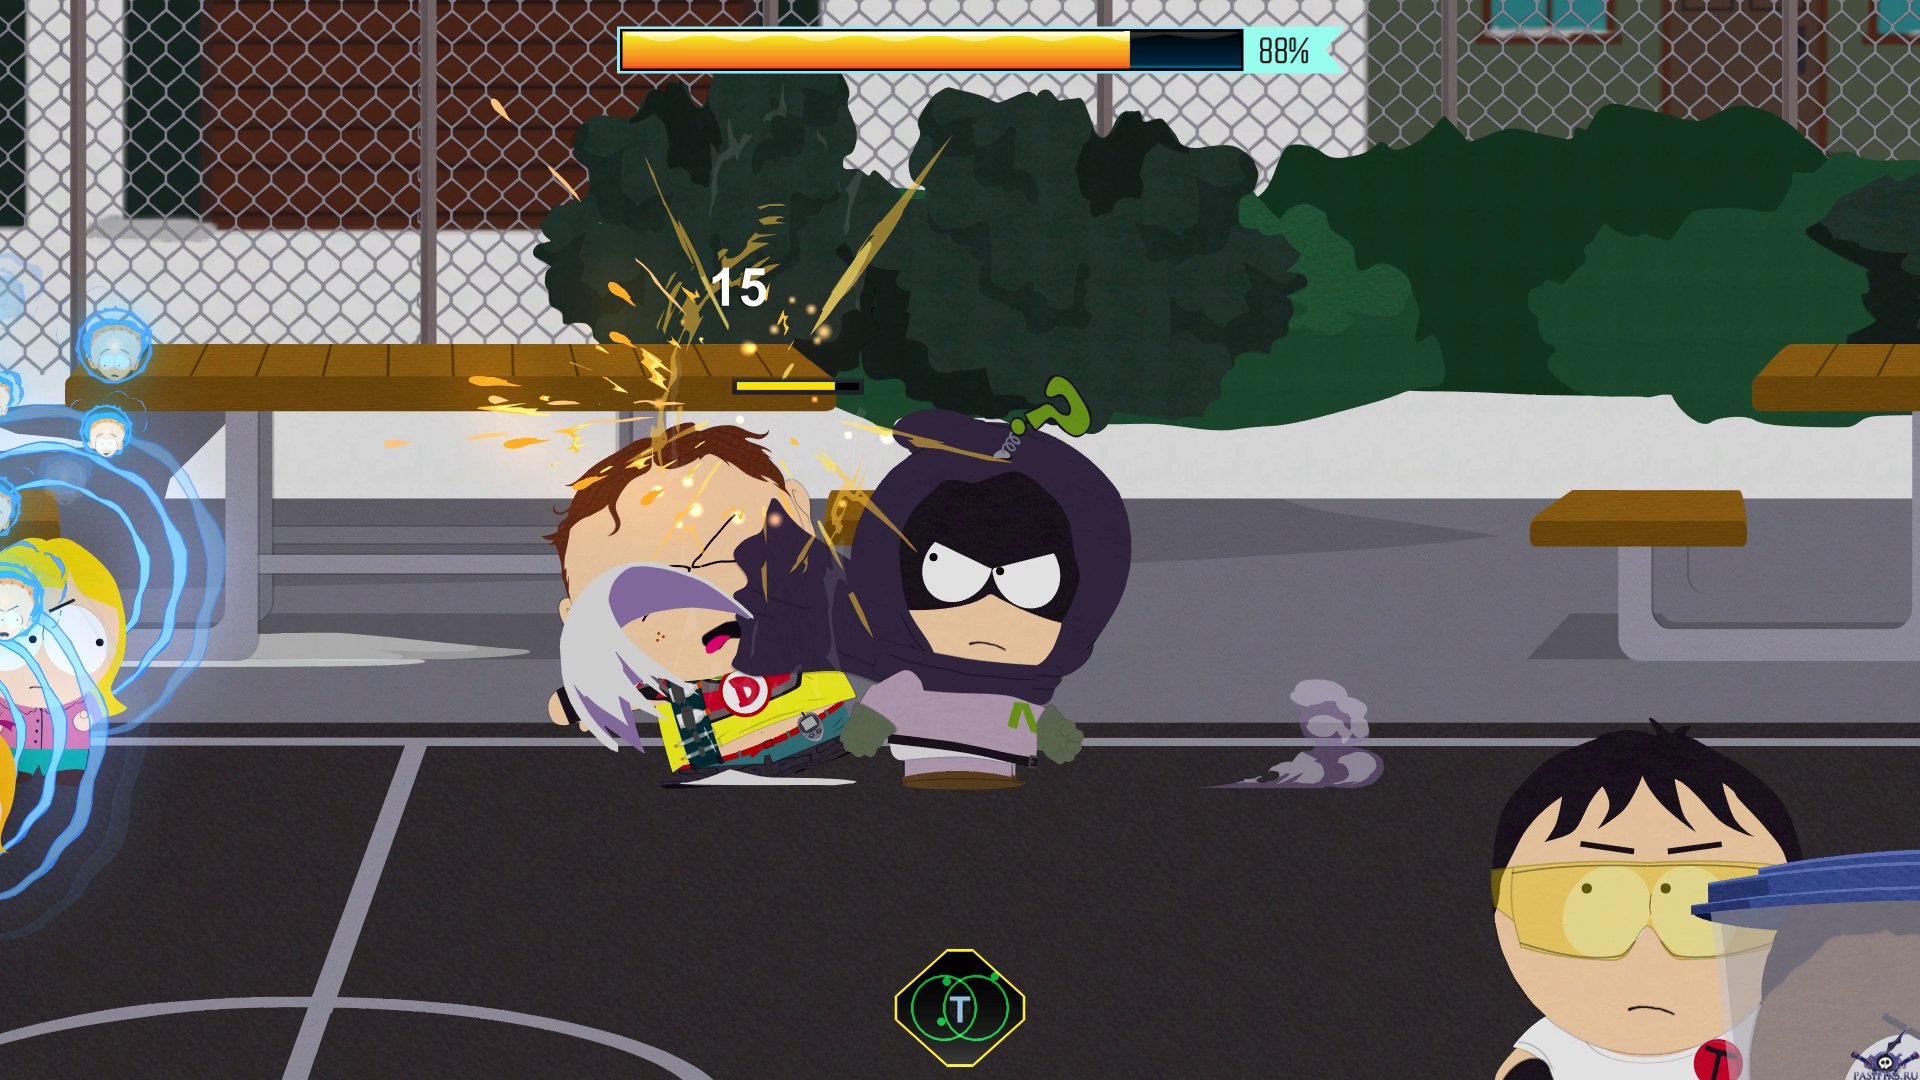 South park the fractured but whole купить ключ steam дешево фото 42